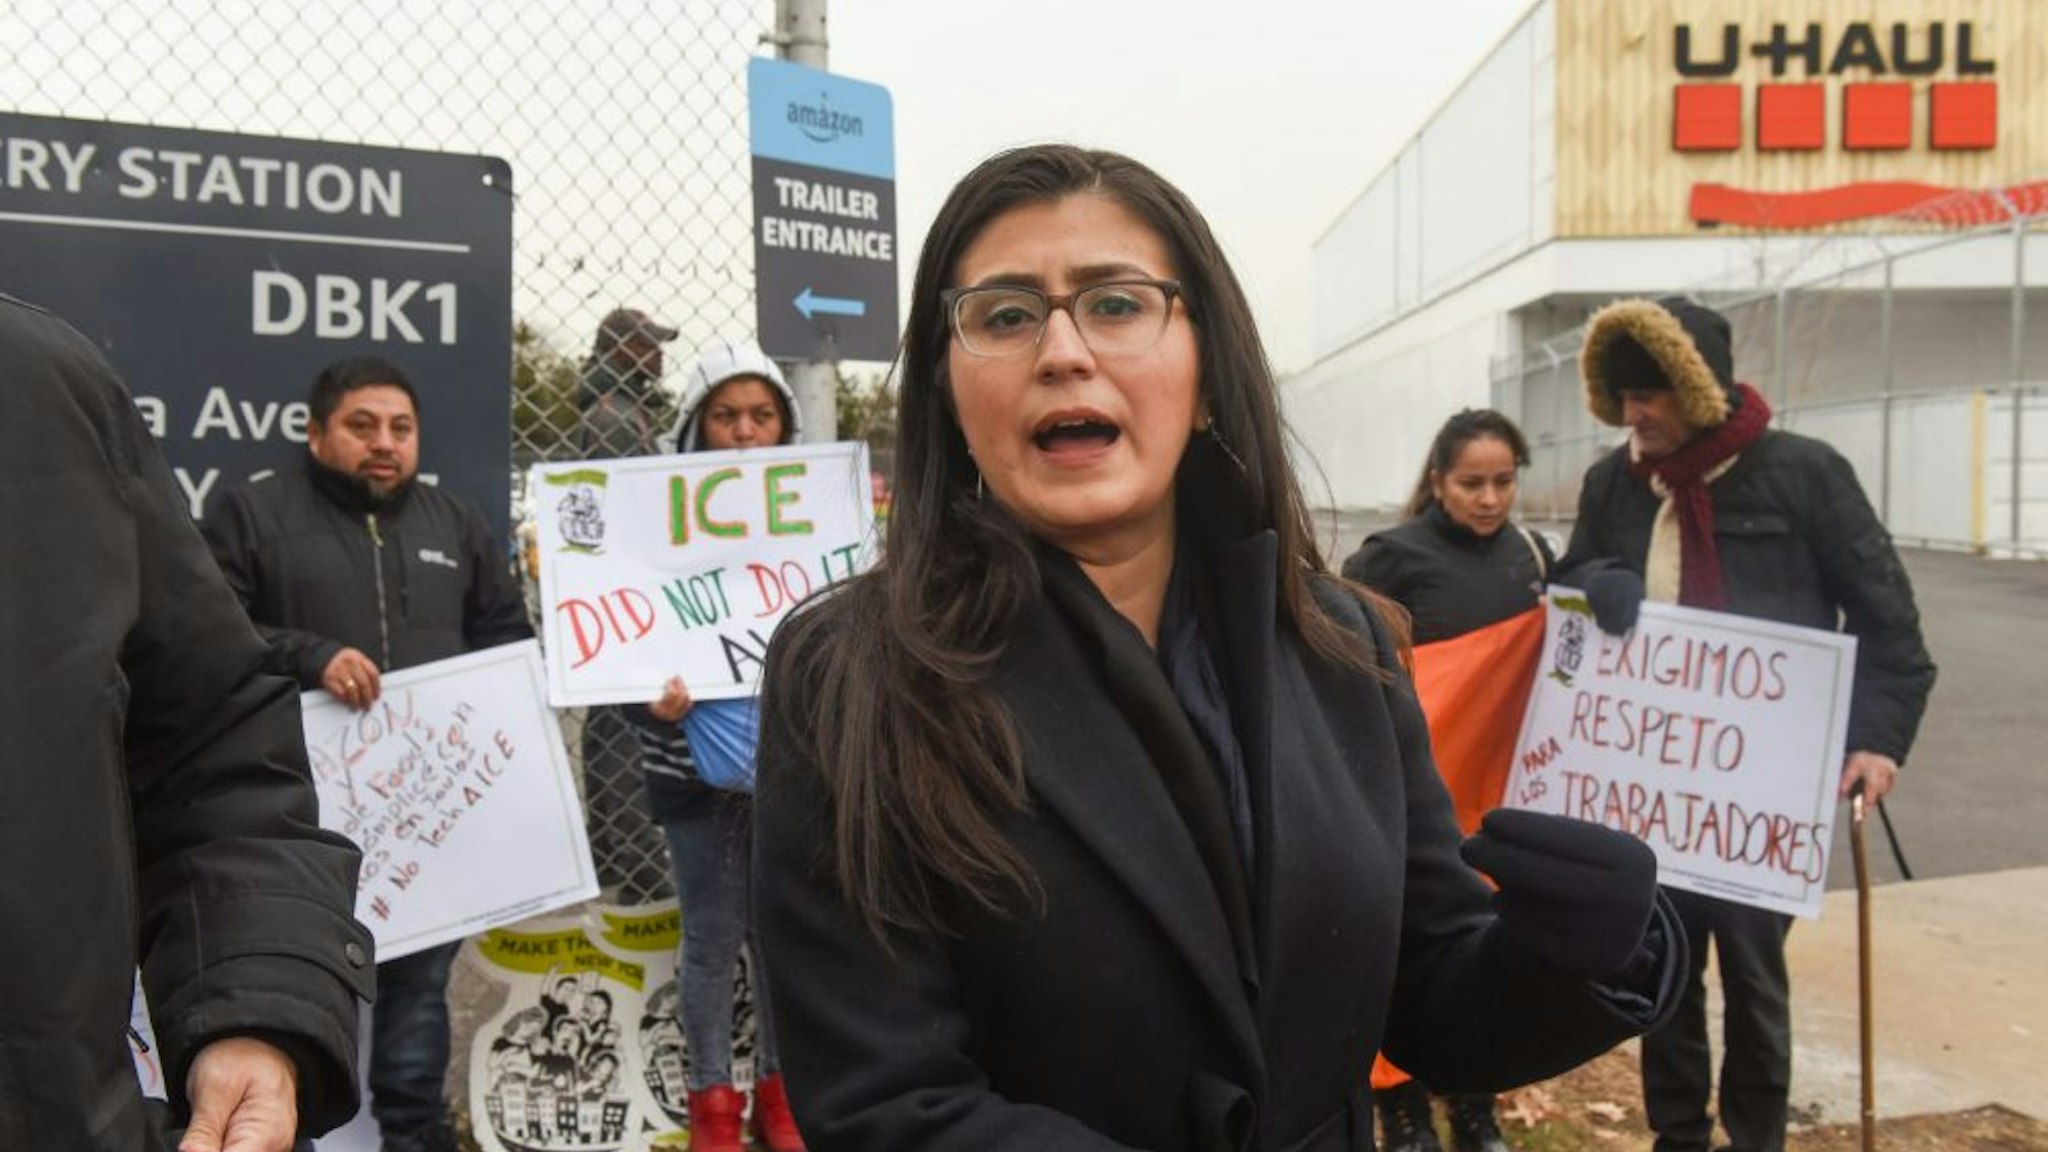 NEW YORK, NY - DECEMBER 16: State Sen. Jessica Ramos (D-NY) delivers remarks while immigrant and labor activists participate in a rally outside of a Amazon distribution center on December 16, 2019 in the Queens borough of New York City. Activists voiced concerns about the safety in the Amazon warehouse work environment. A Reveal investigation from the Center for Investigative Reporting found the rate of serious injuries for 23 facilities studied was more than double the national average for the warehousing industry.